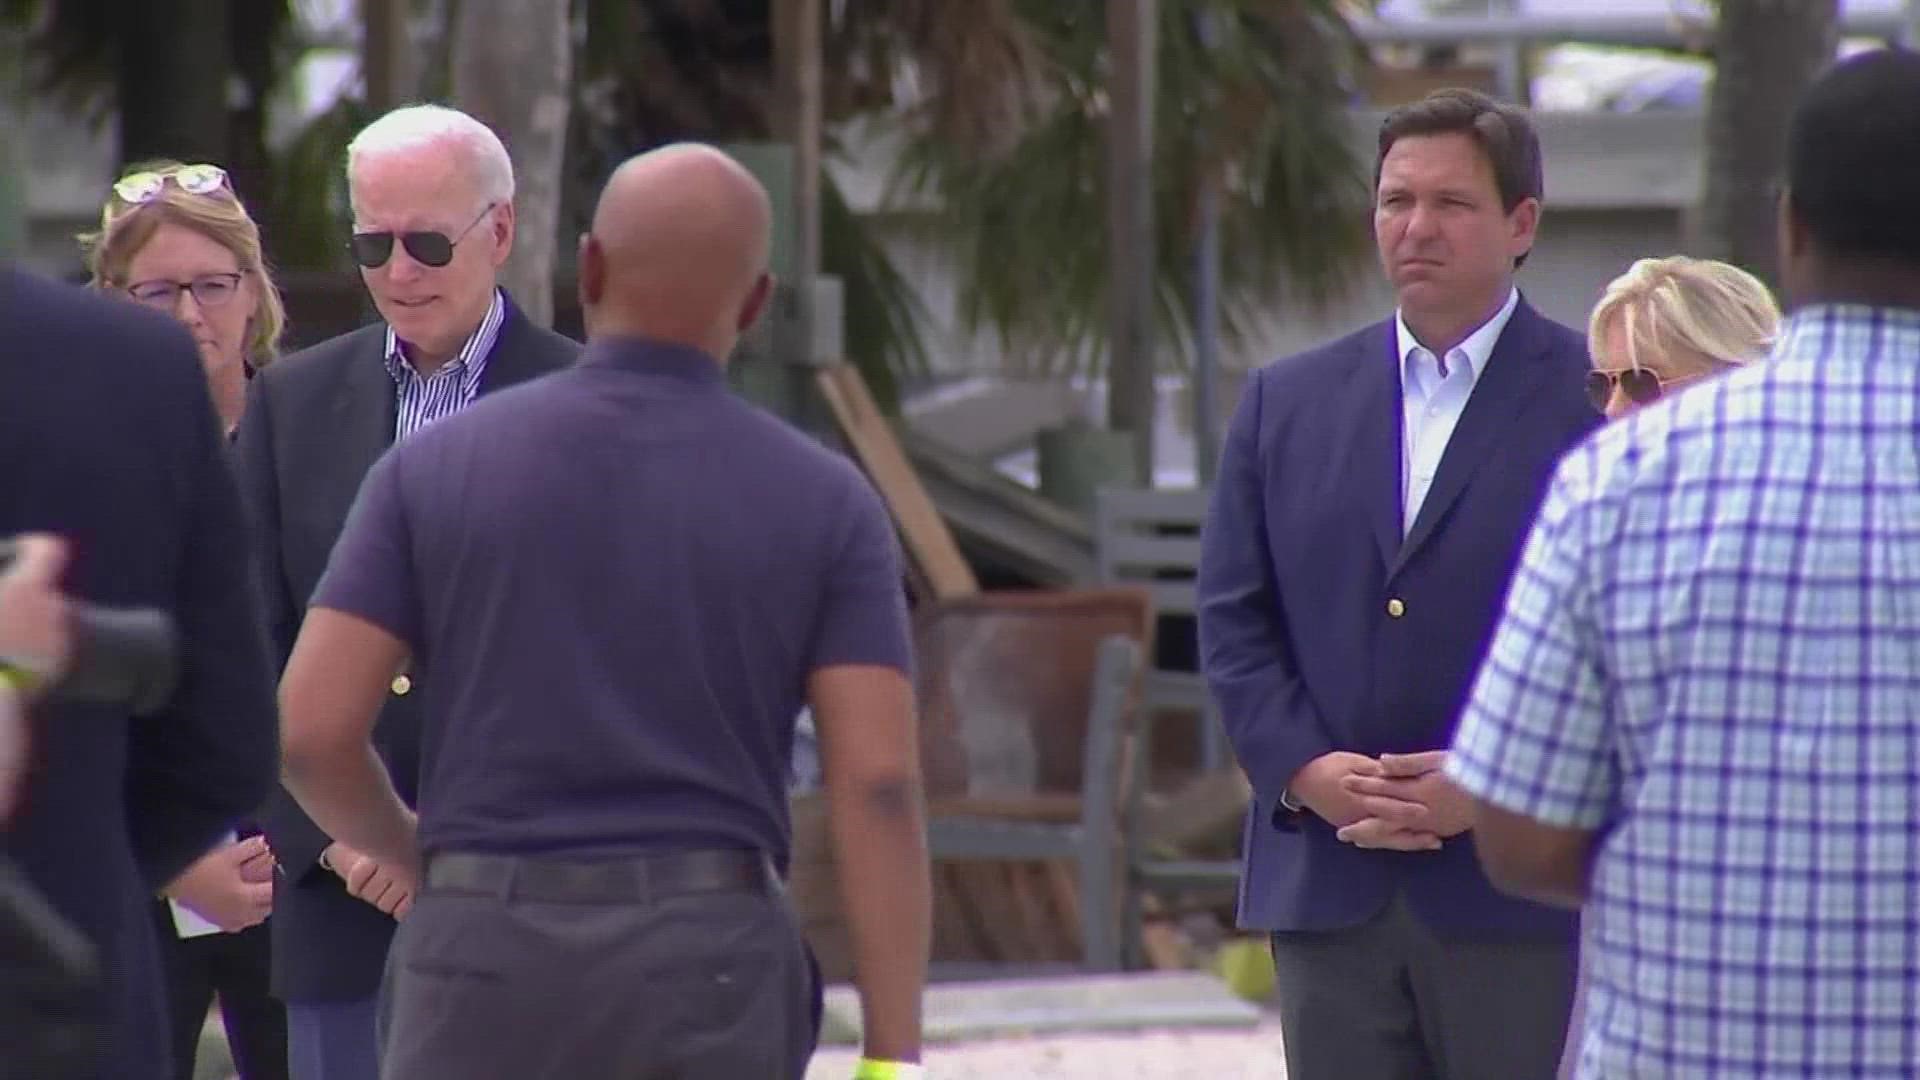 Florida Governor DeSantis and President Joe Biden met in Fort Myers, Florida to discuss the future after Hurricane Ian.